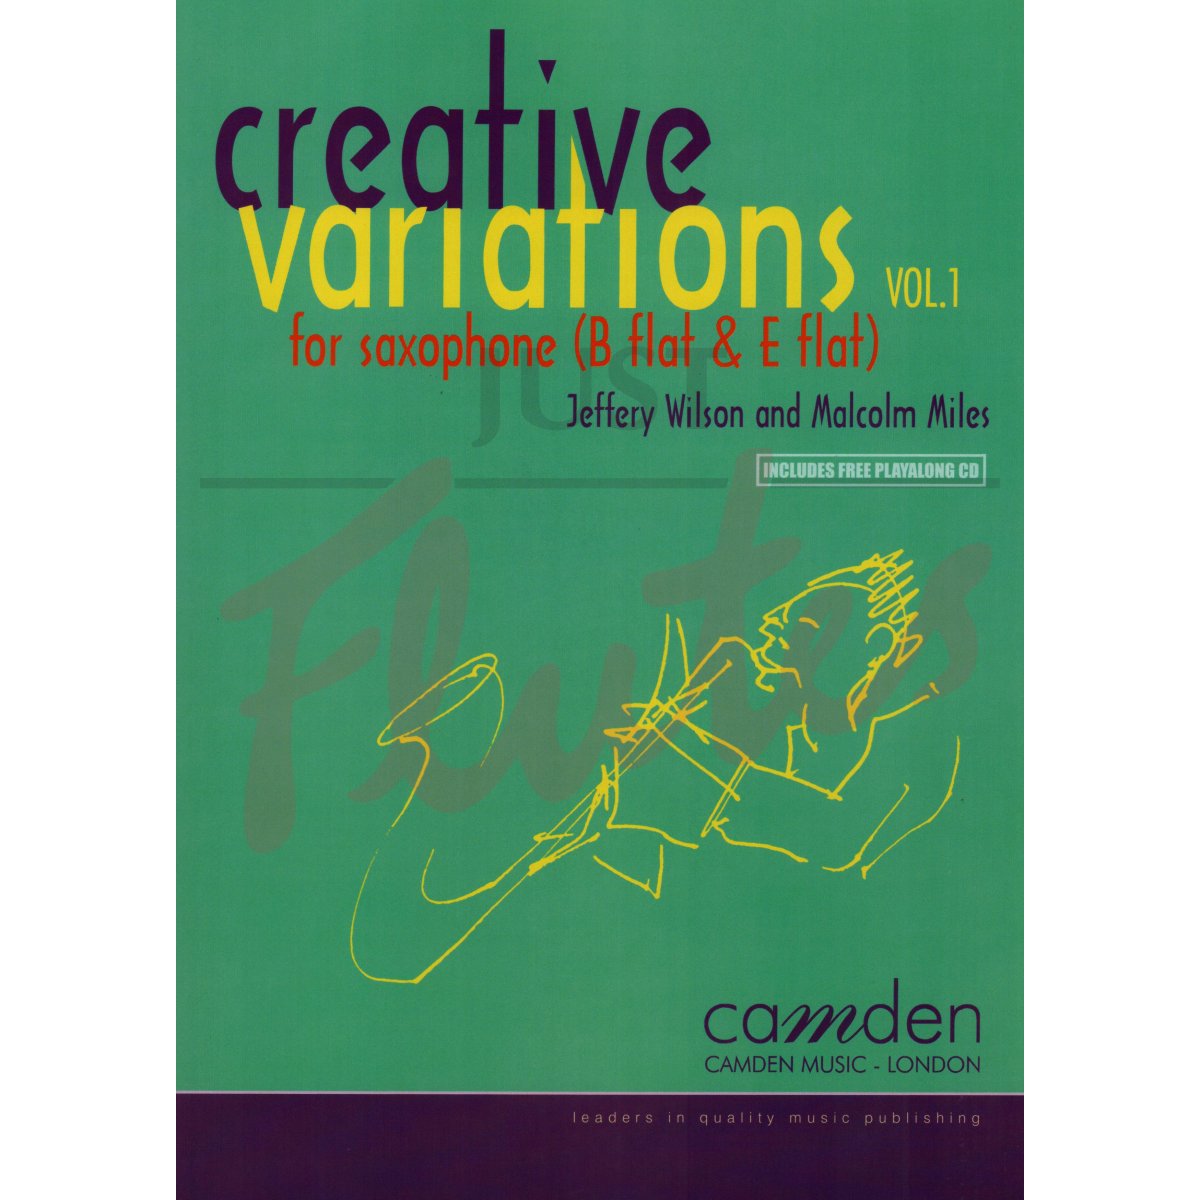 Creative Variations for Saxophone, Vol 1